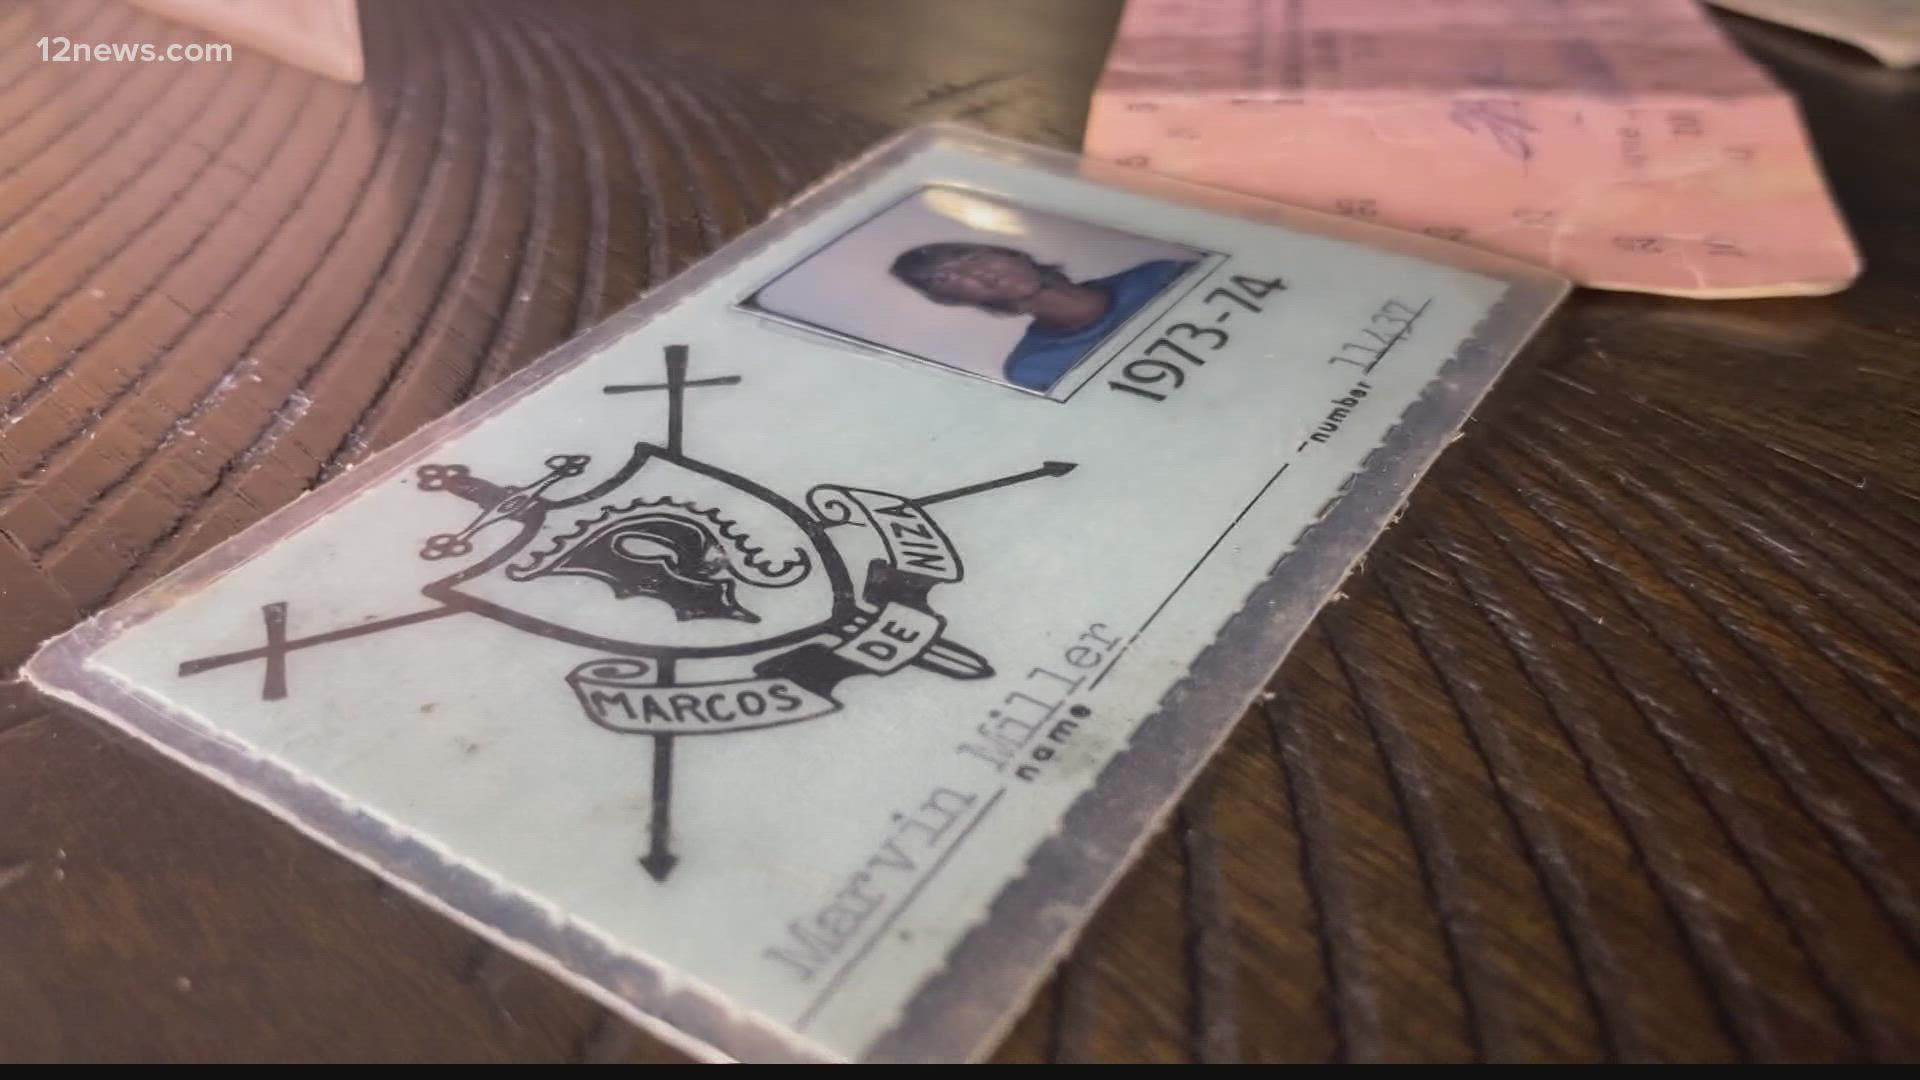 An attic discovery during a home renovation project inspired one Valley man to find the owner of a wallet dating back to the 1970s.